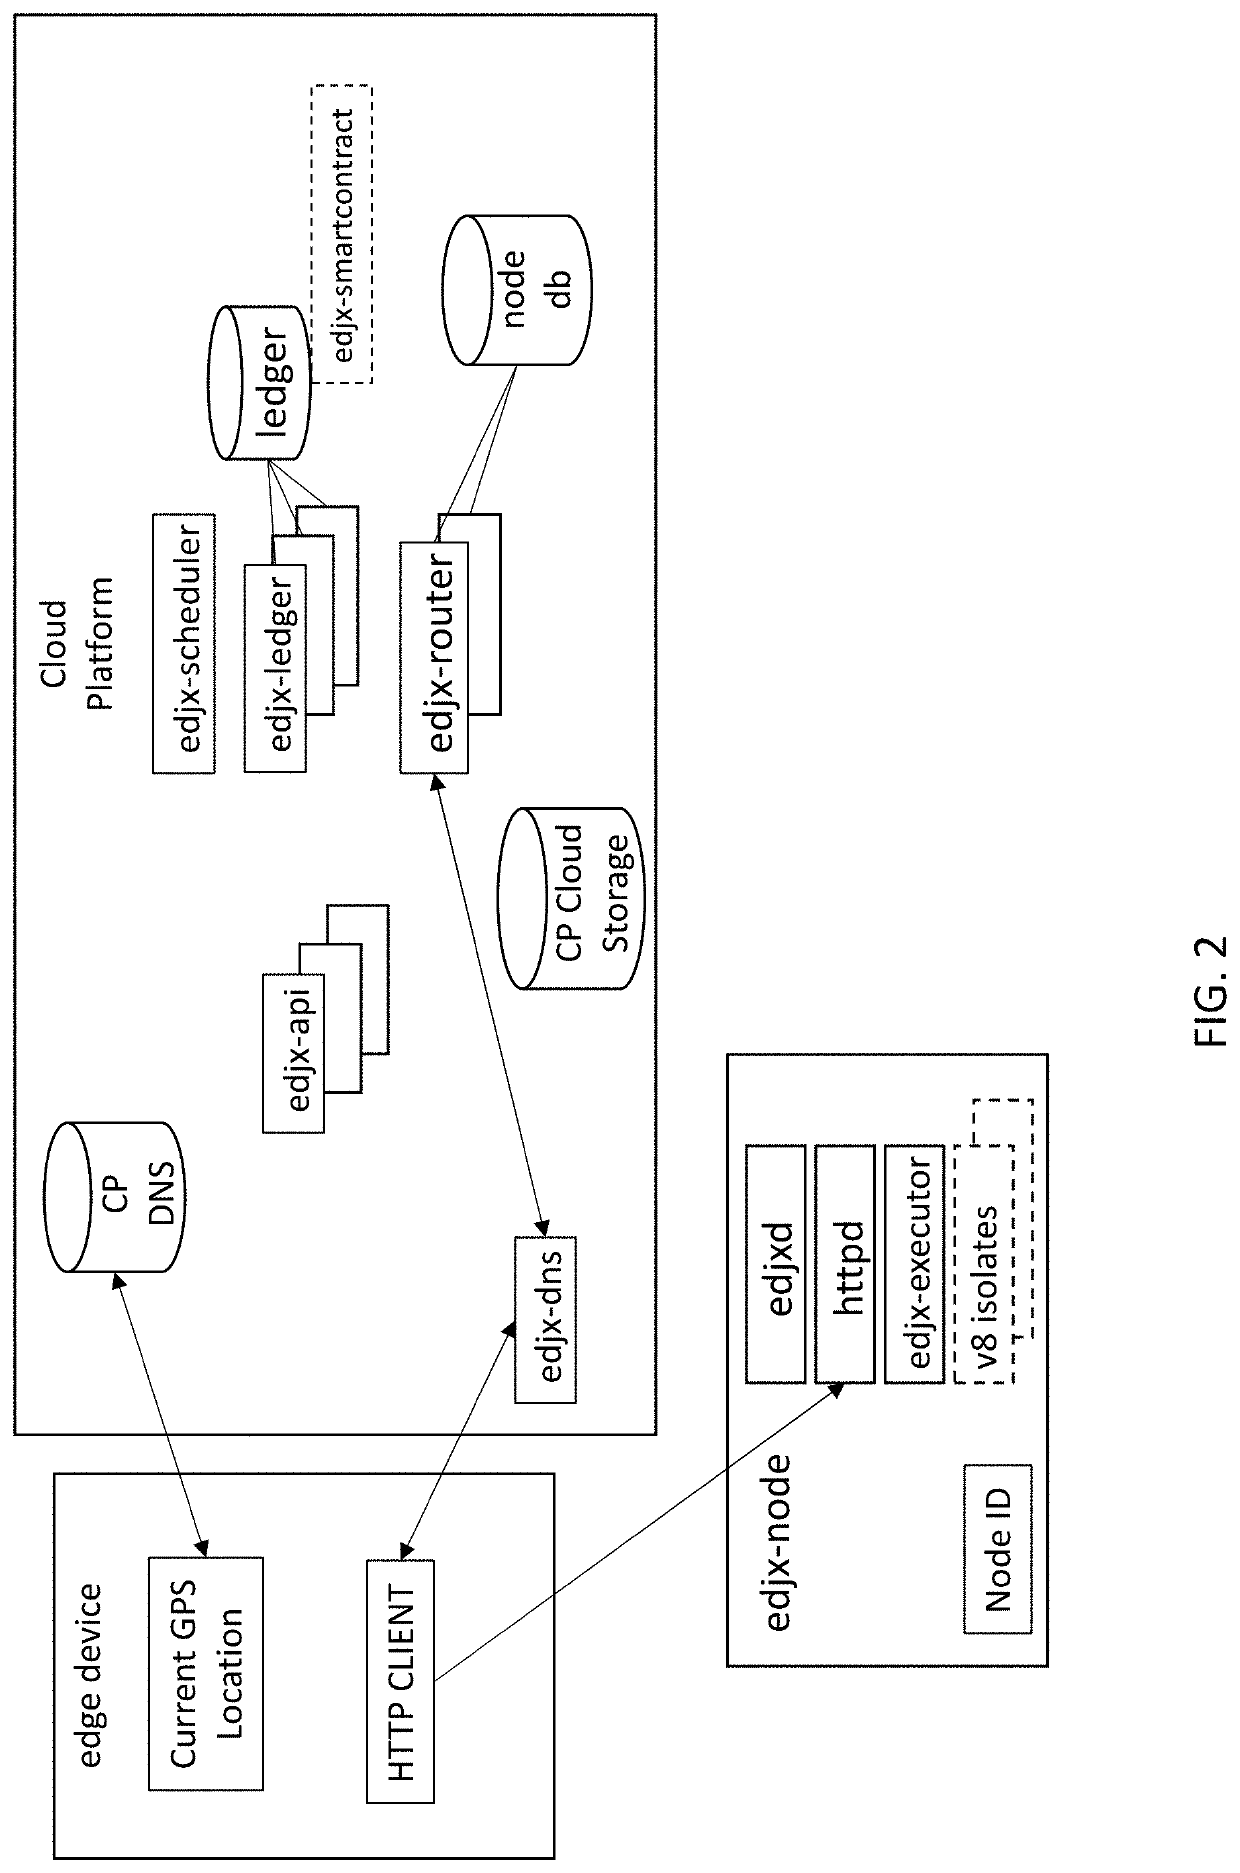 Systems and methods for locating server nodes in close proximity to edge devices using georouting